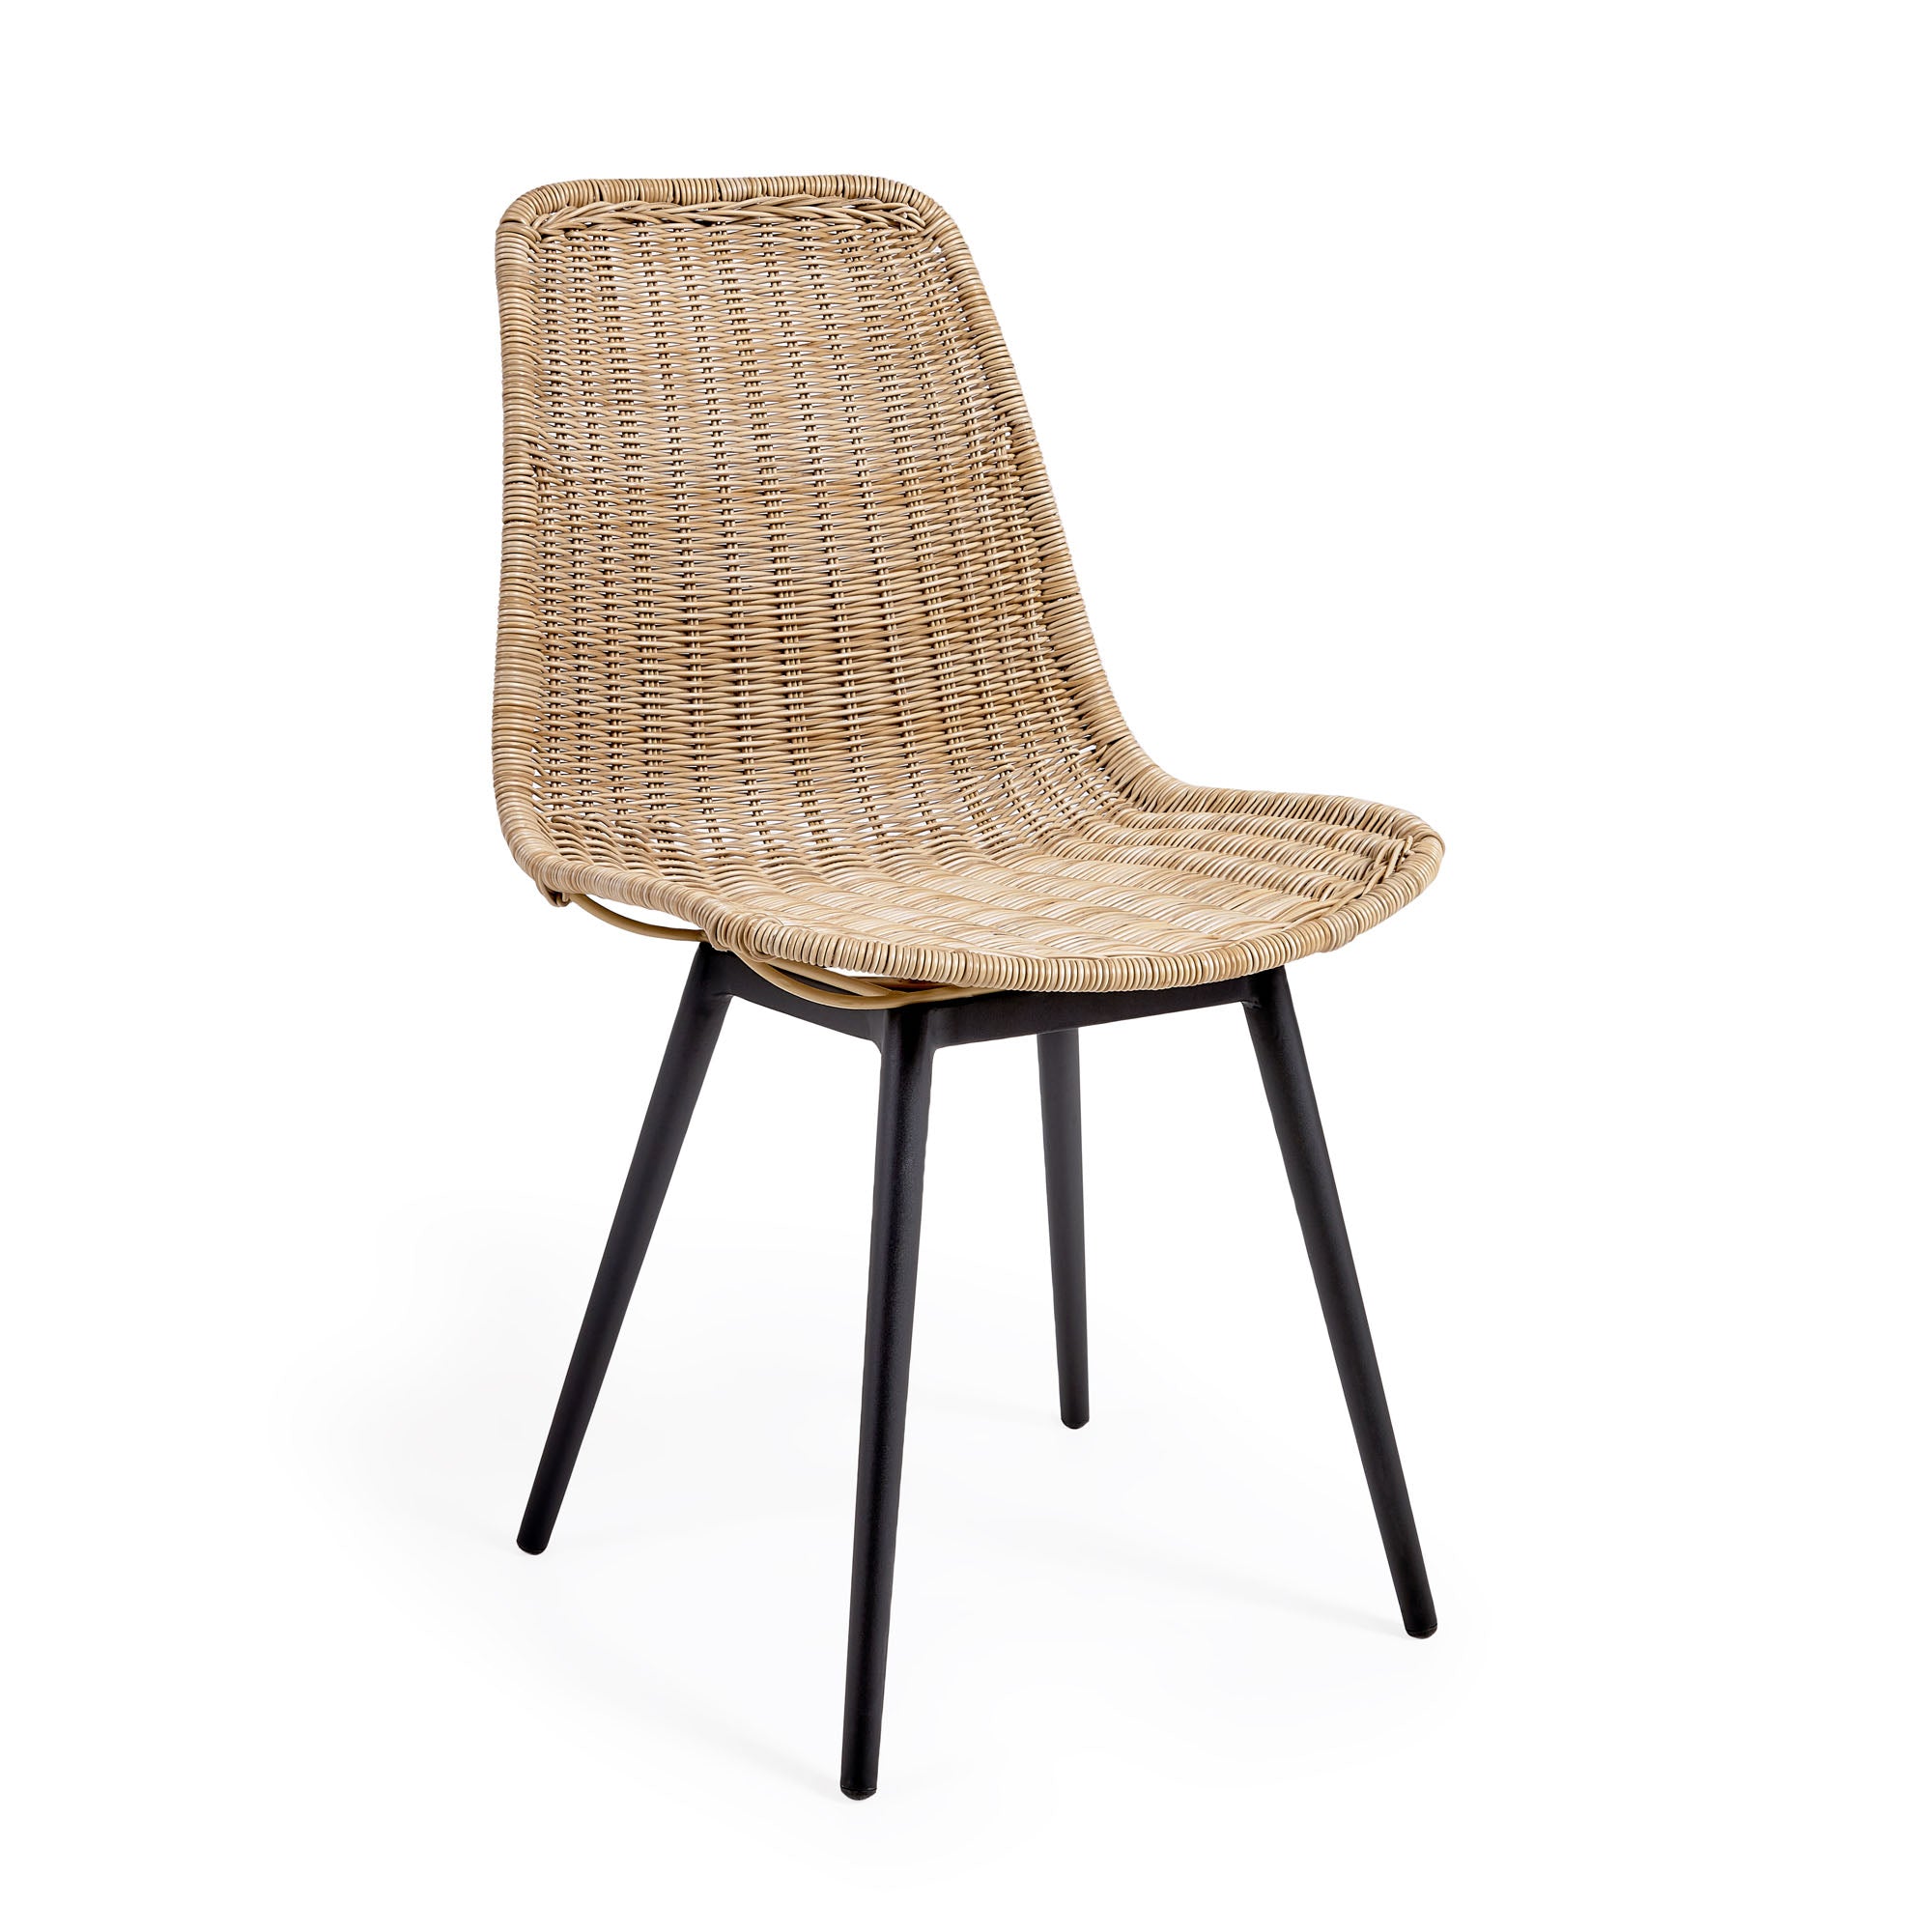 Equal outdoor chair in synthetic rattan with aluminium legs in a black finish